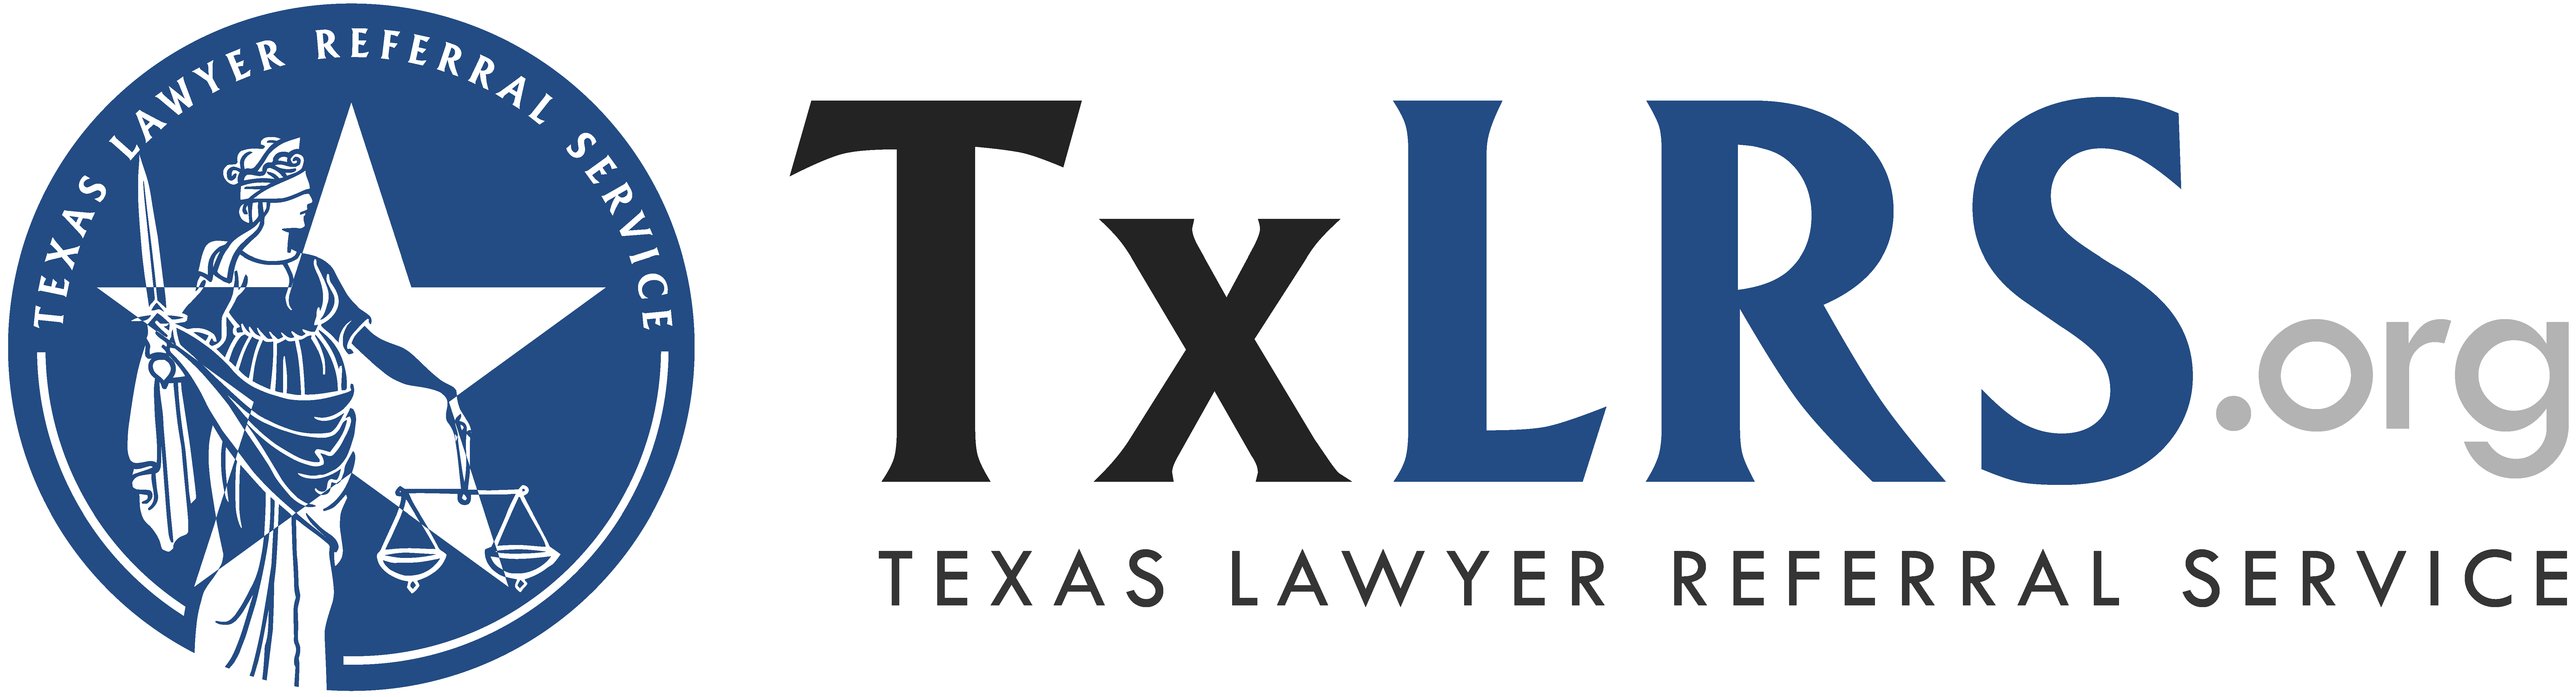 Texas Lawyer Referral Service